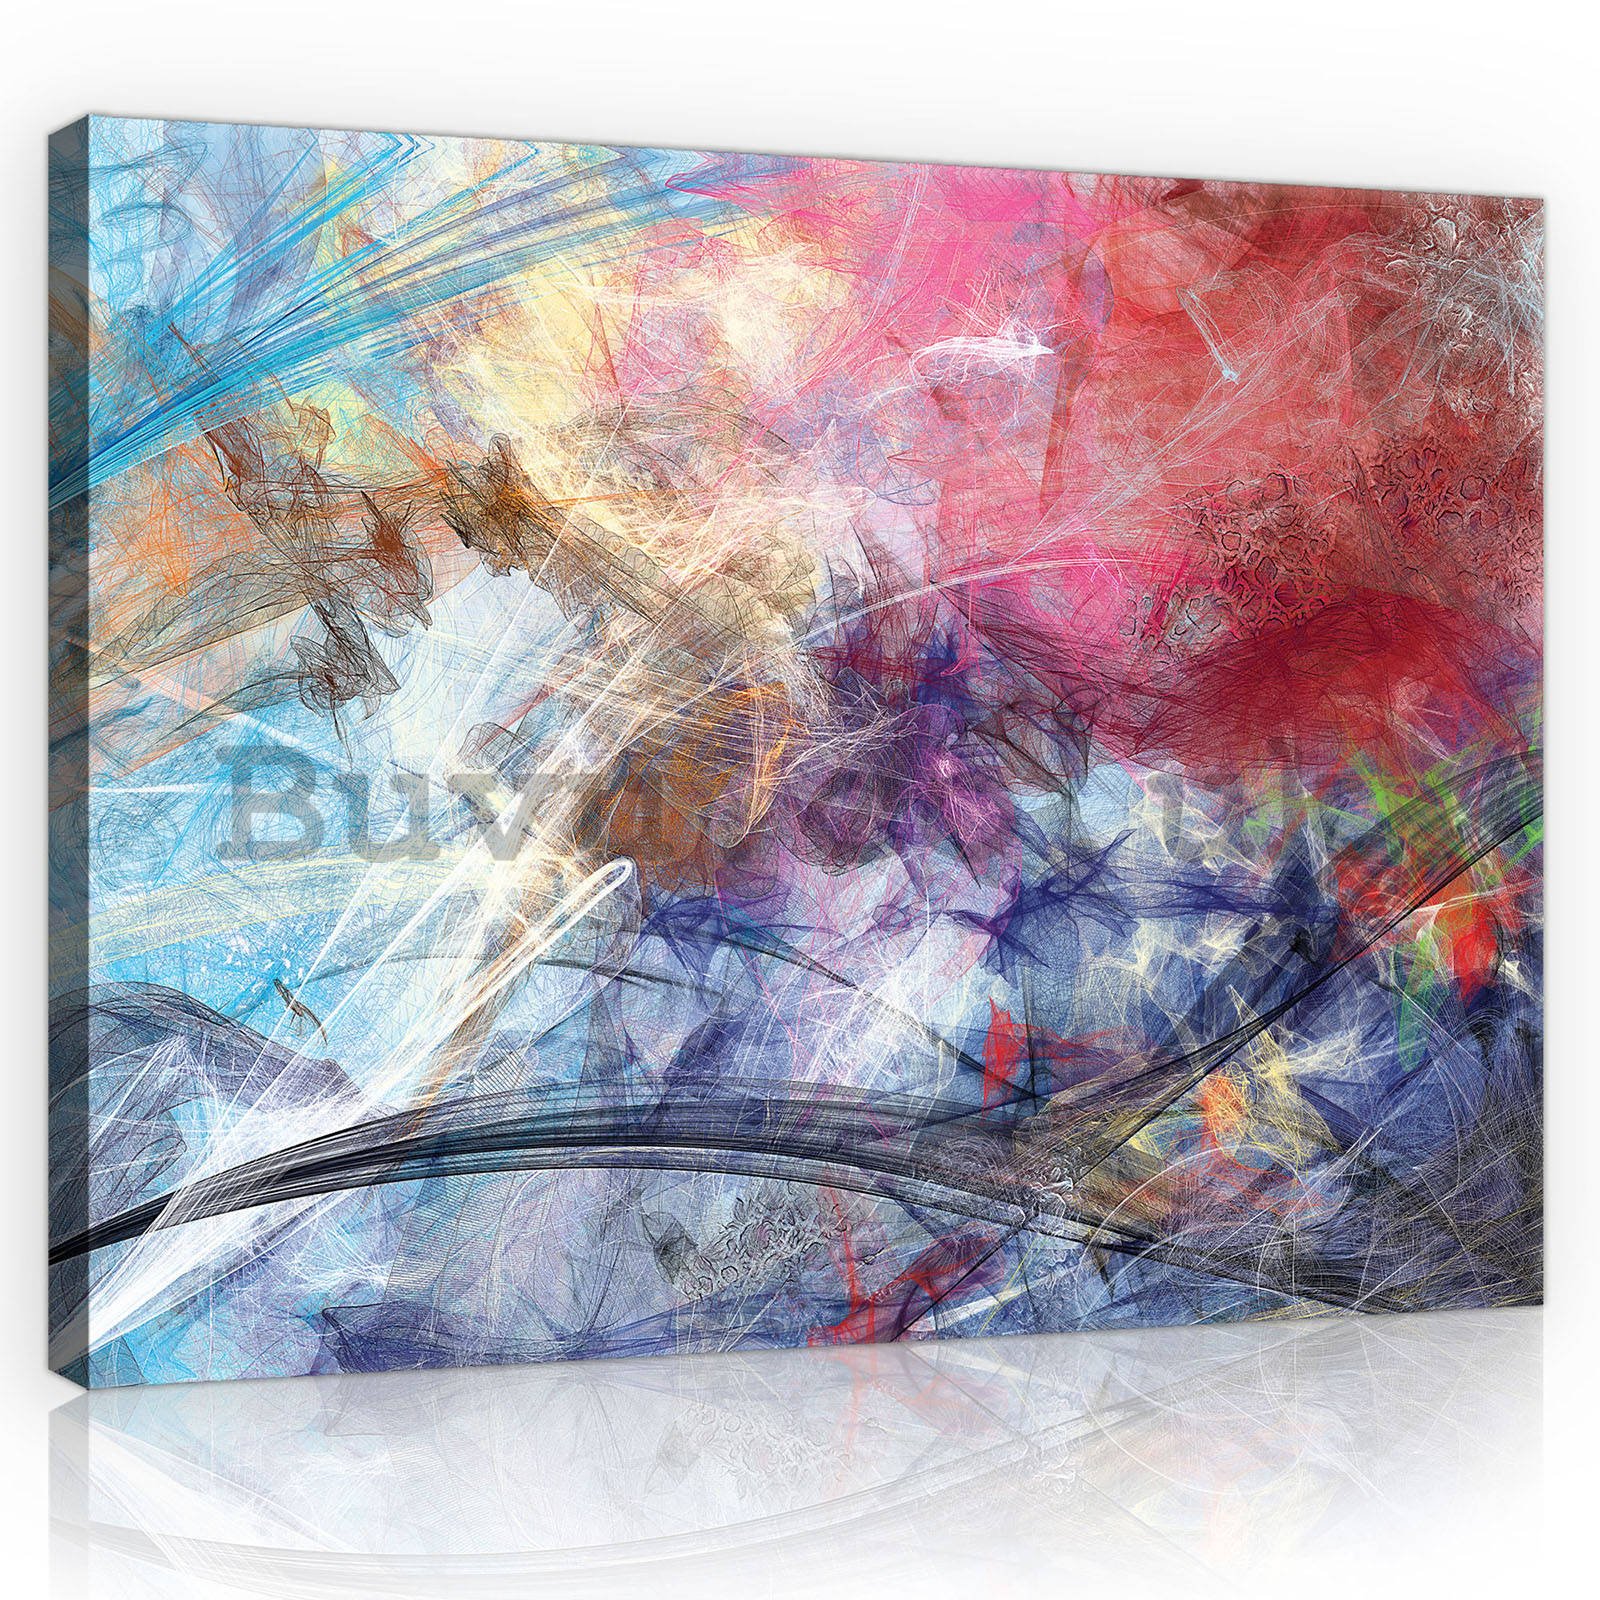 Painting on canvas: Modern abstraction (4) - 80x60 cm